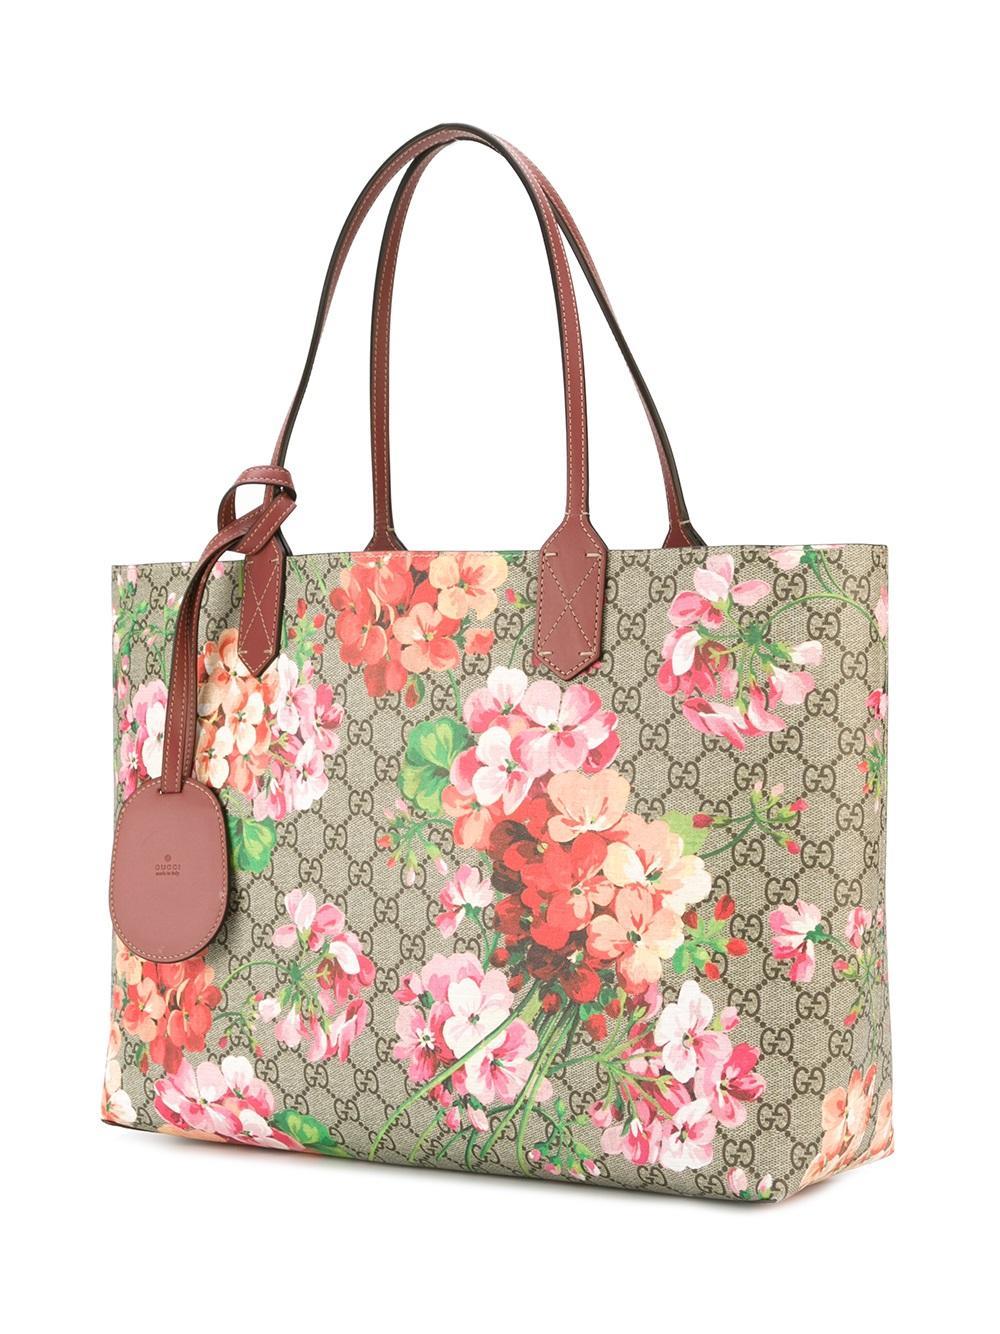 Gucci Leather Reversible Tote Bag With Blooms Print - Lyst